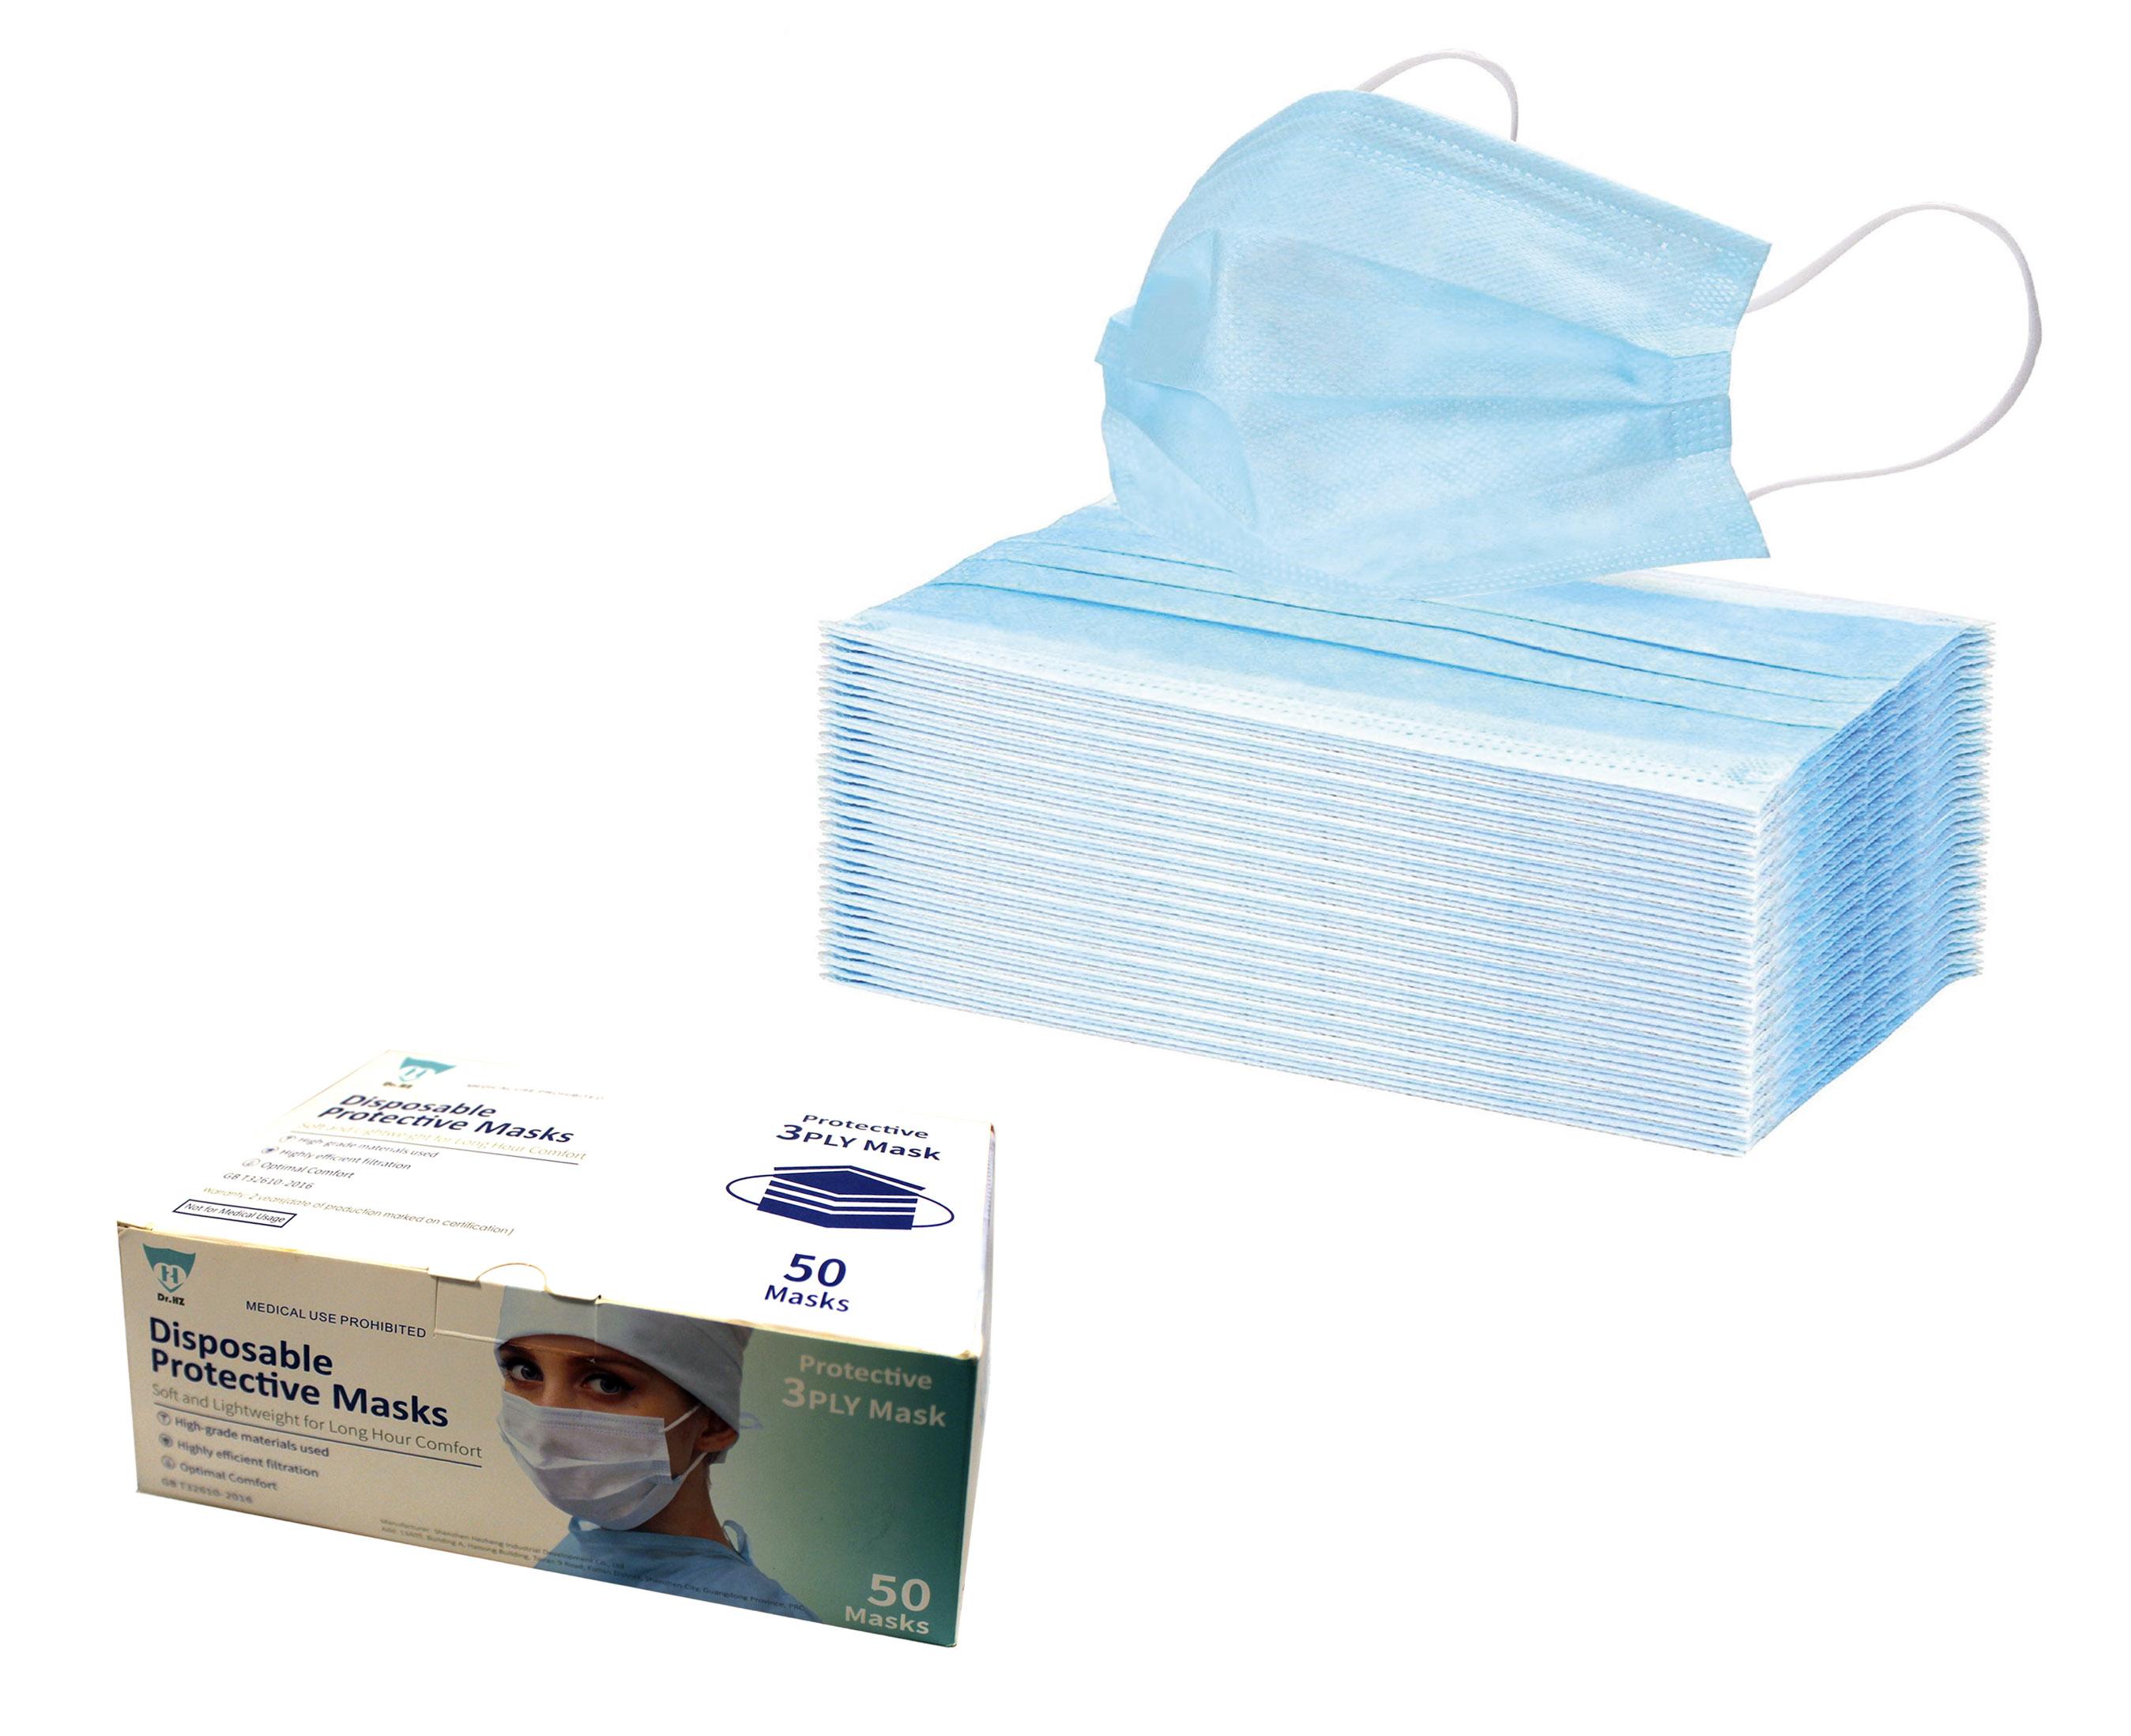 Protective Face Mask in box of 50 and stacked neatly